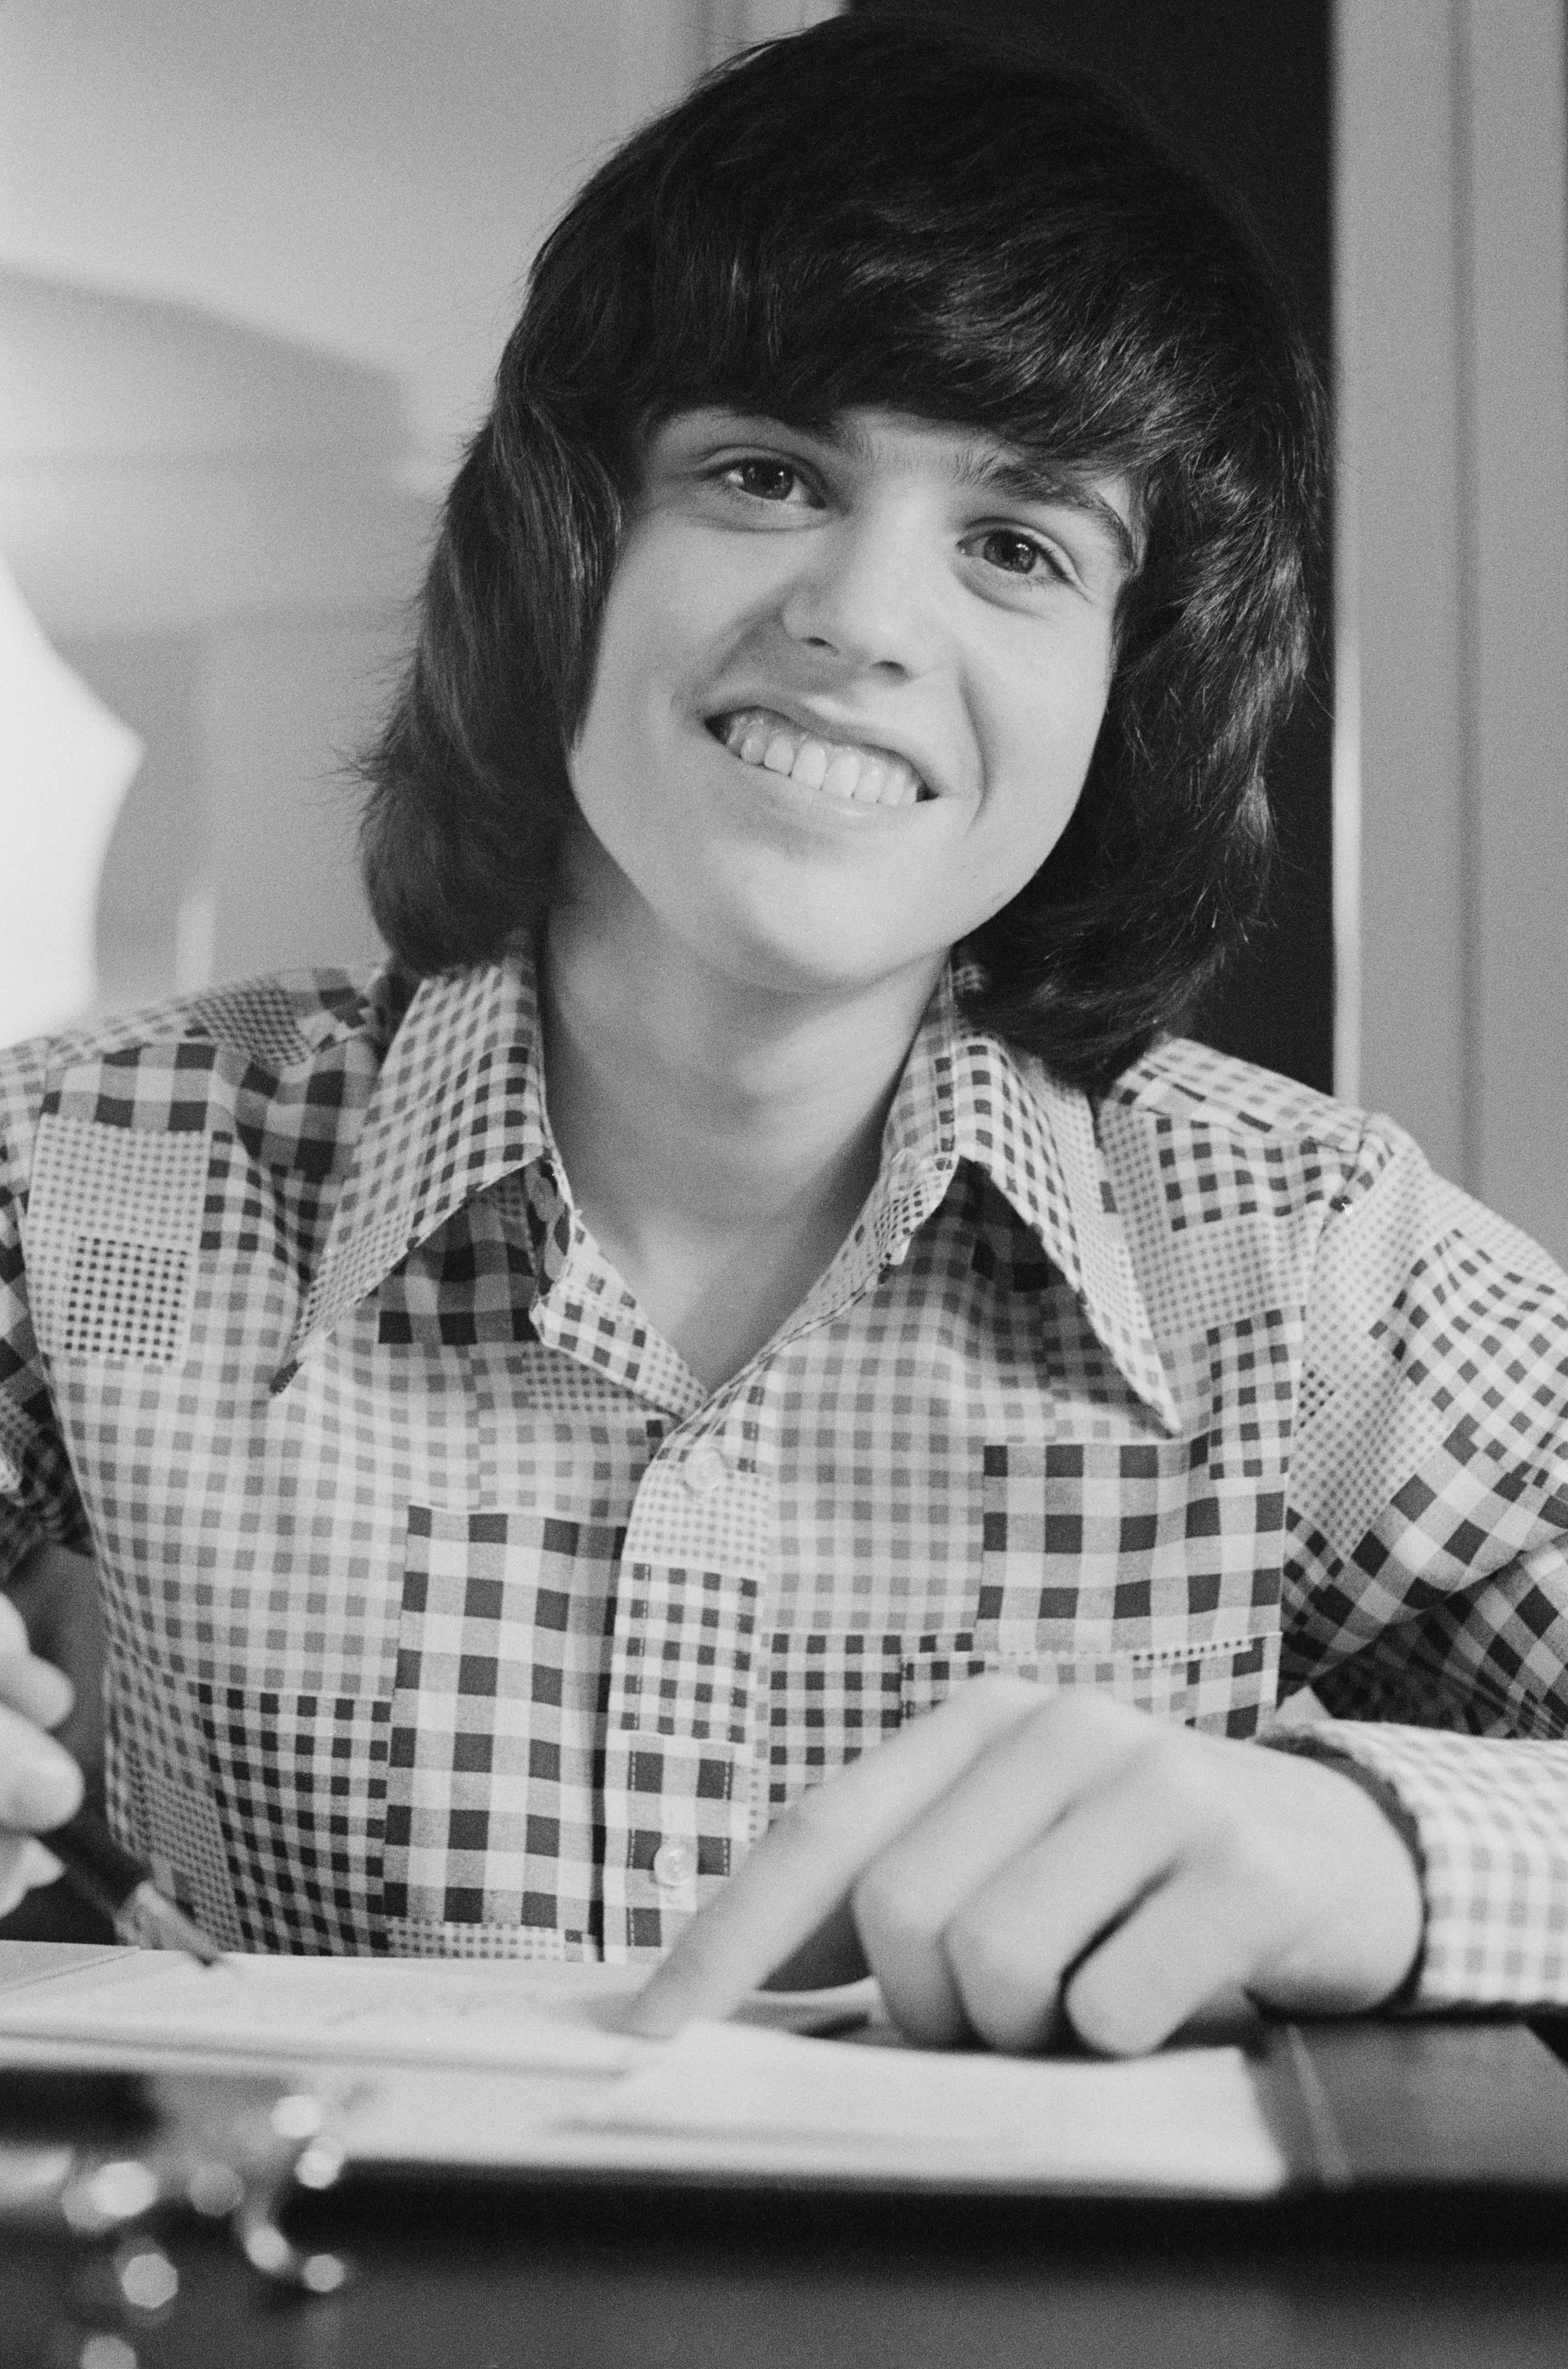 Donny Osmond photographed in a black and white picture on March 2, 1973 | Source: Getty images